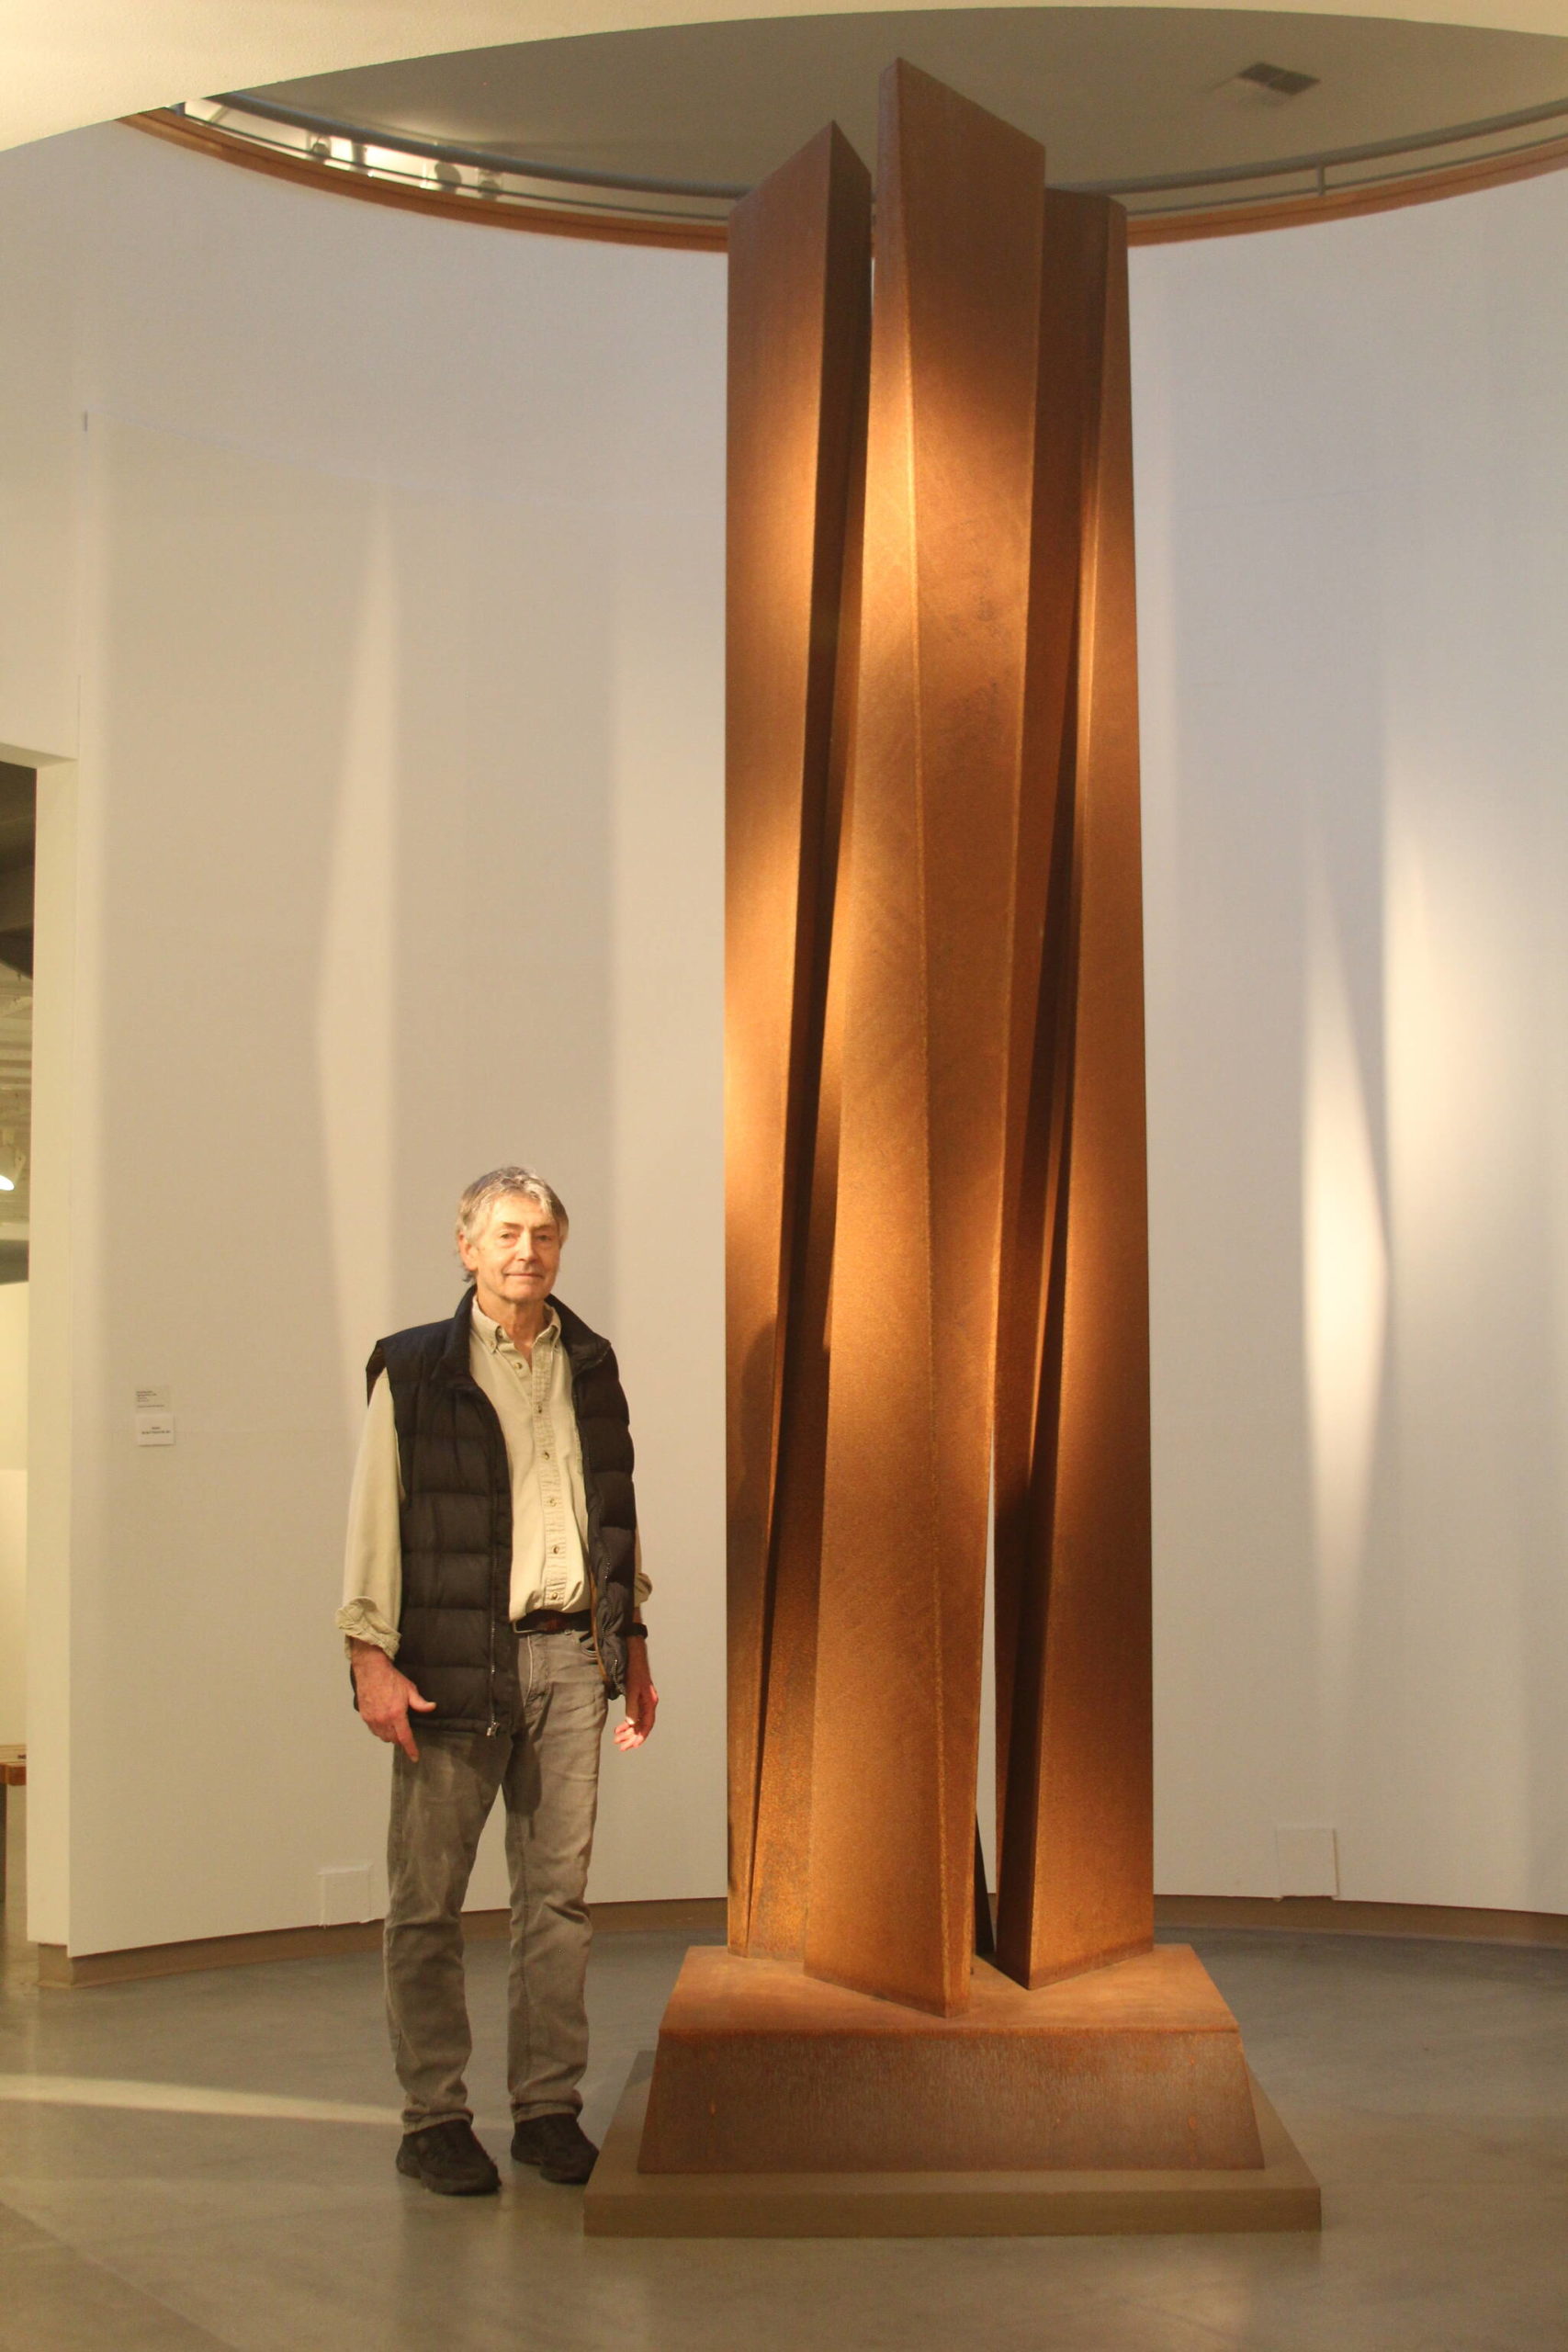 Photo by Karina Andrew/Whidbey News-Times
Richard Nash’s 12-foot sculpture “Segmented Prism #2” is the focal point of his exhibit at the Museum of Northwest Art in La Conner.